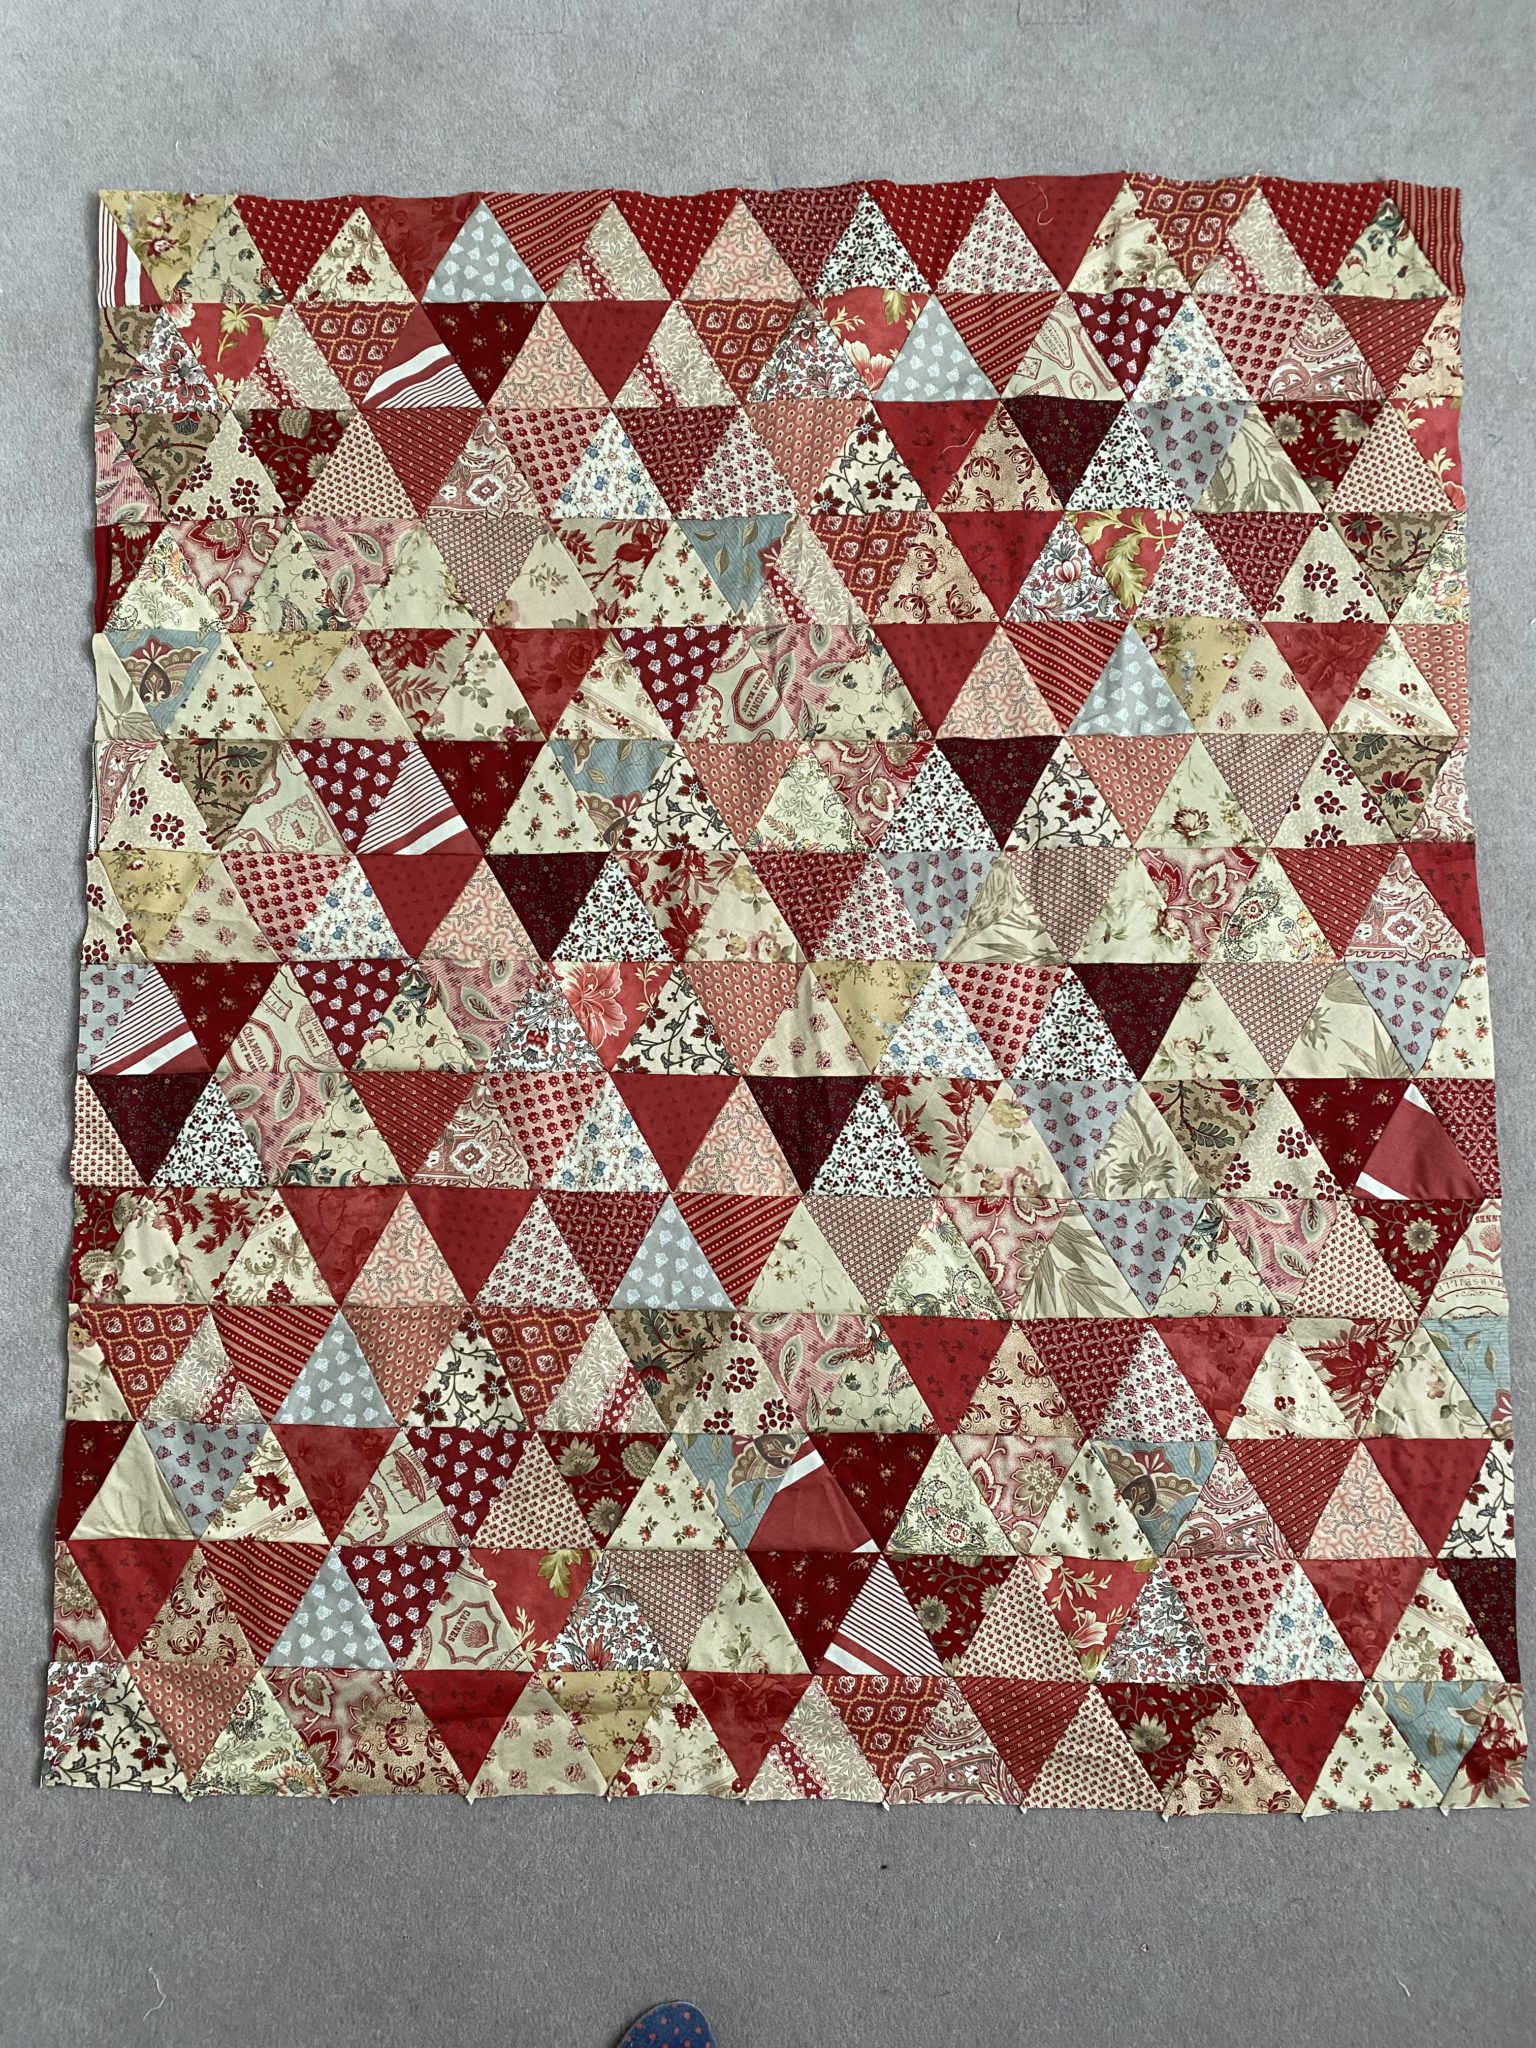 susies-scraps.com - Free Scrappy Quilt Projects & So Much More